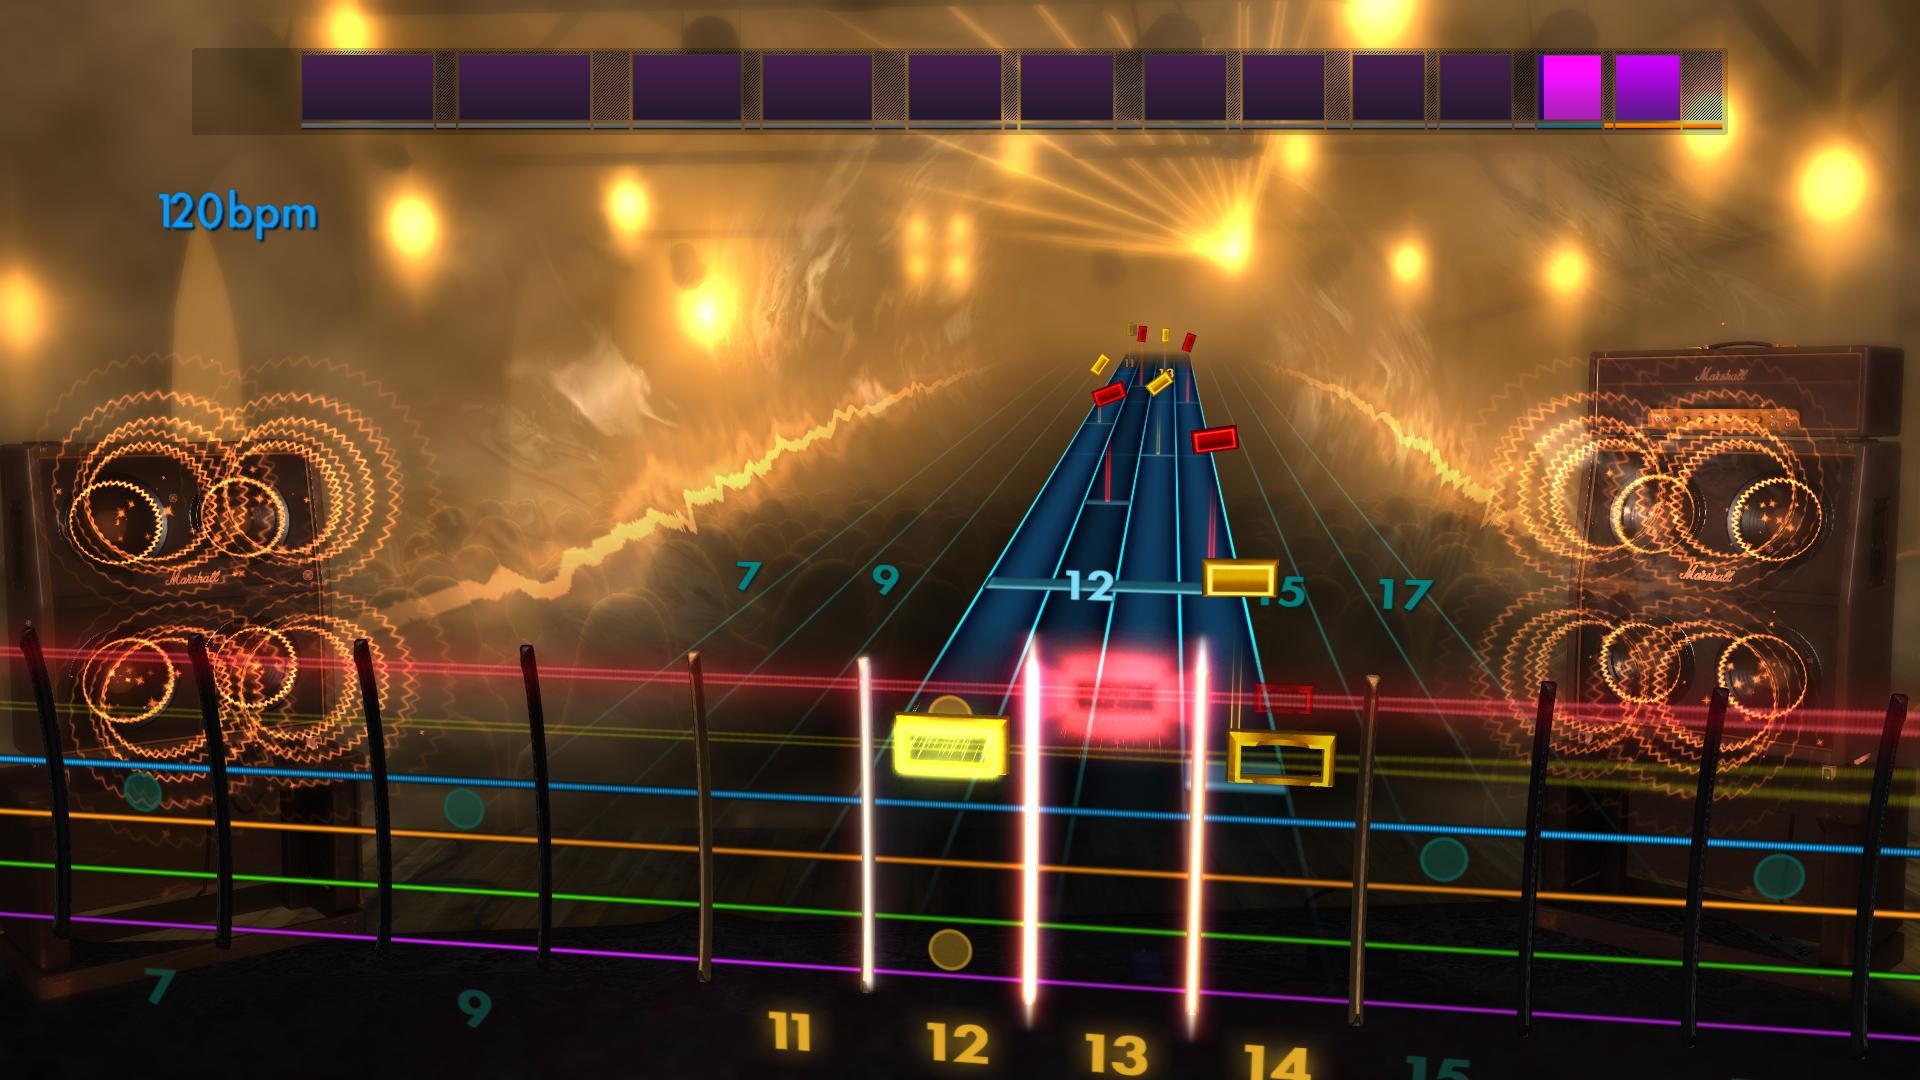 rocksmith 2014 remastered patch download